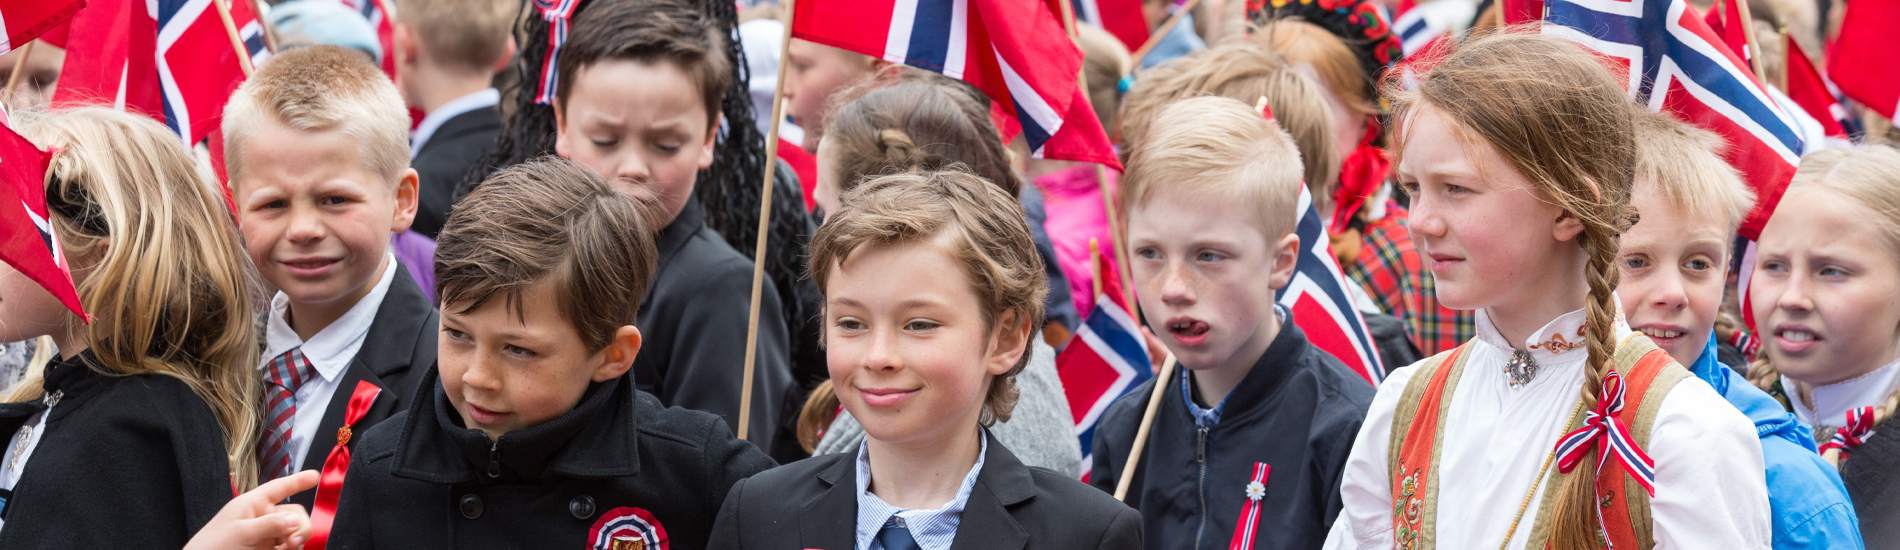 May 17 or Norwegian Constitution Day 2021